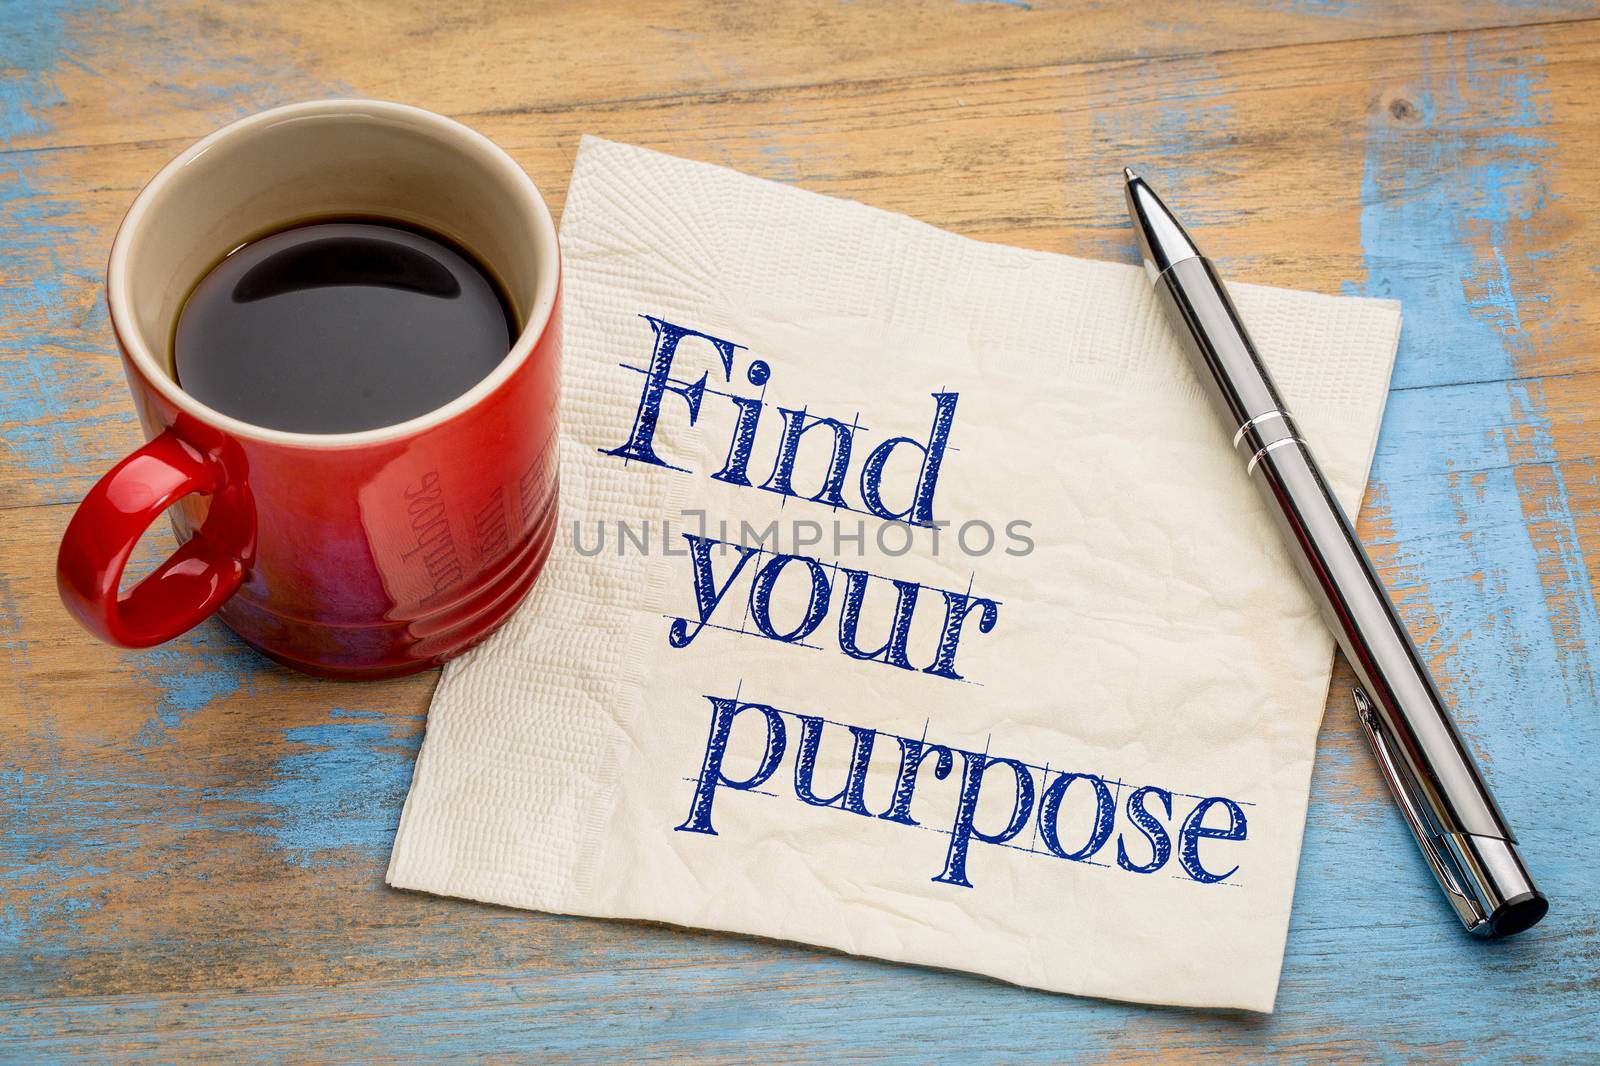 Find your purpose advice by PixelsAway